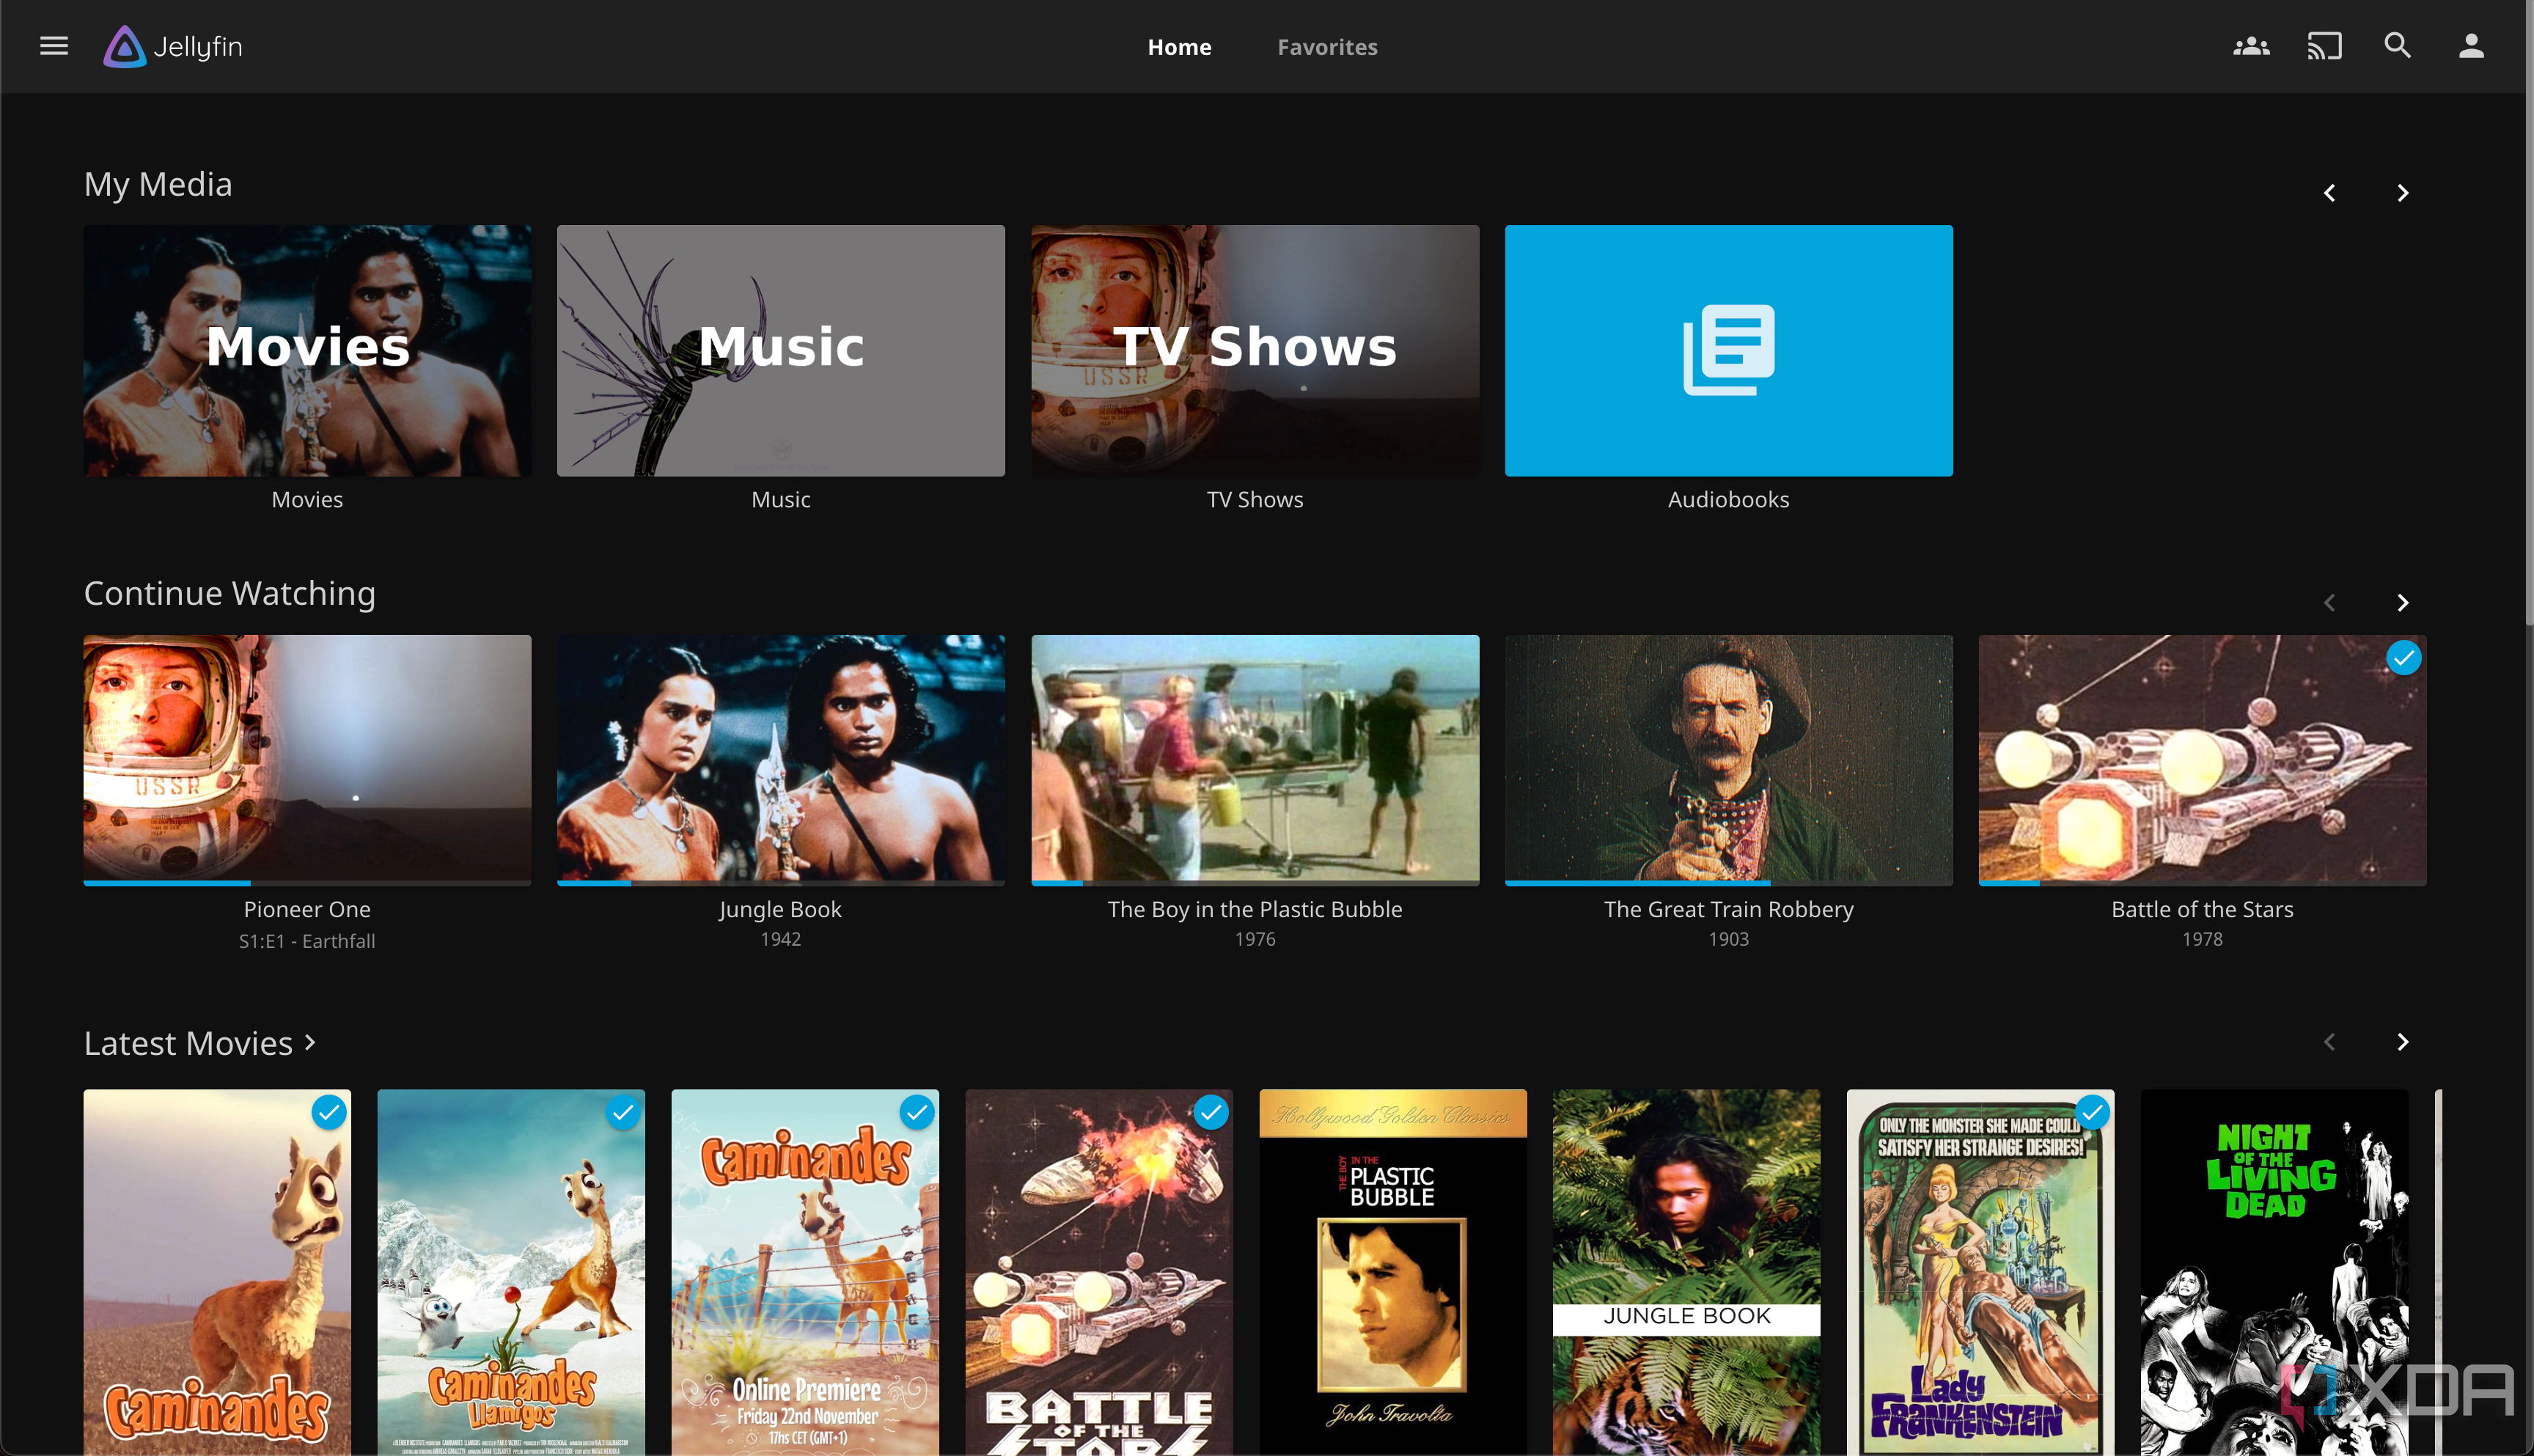 Jellyfin web panel with movies, music, TV shows, and audiobooks